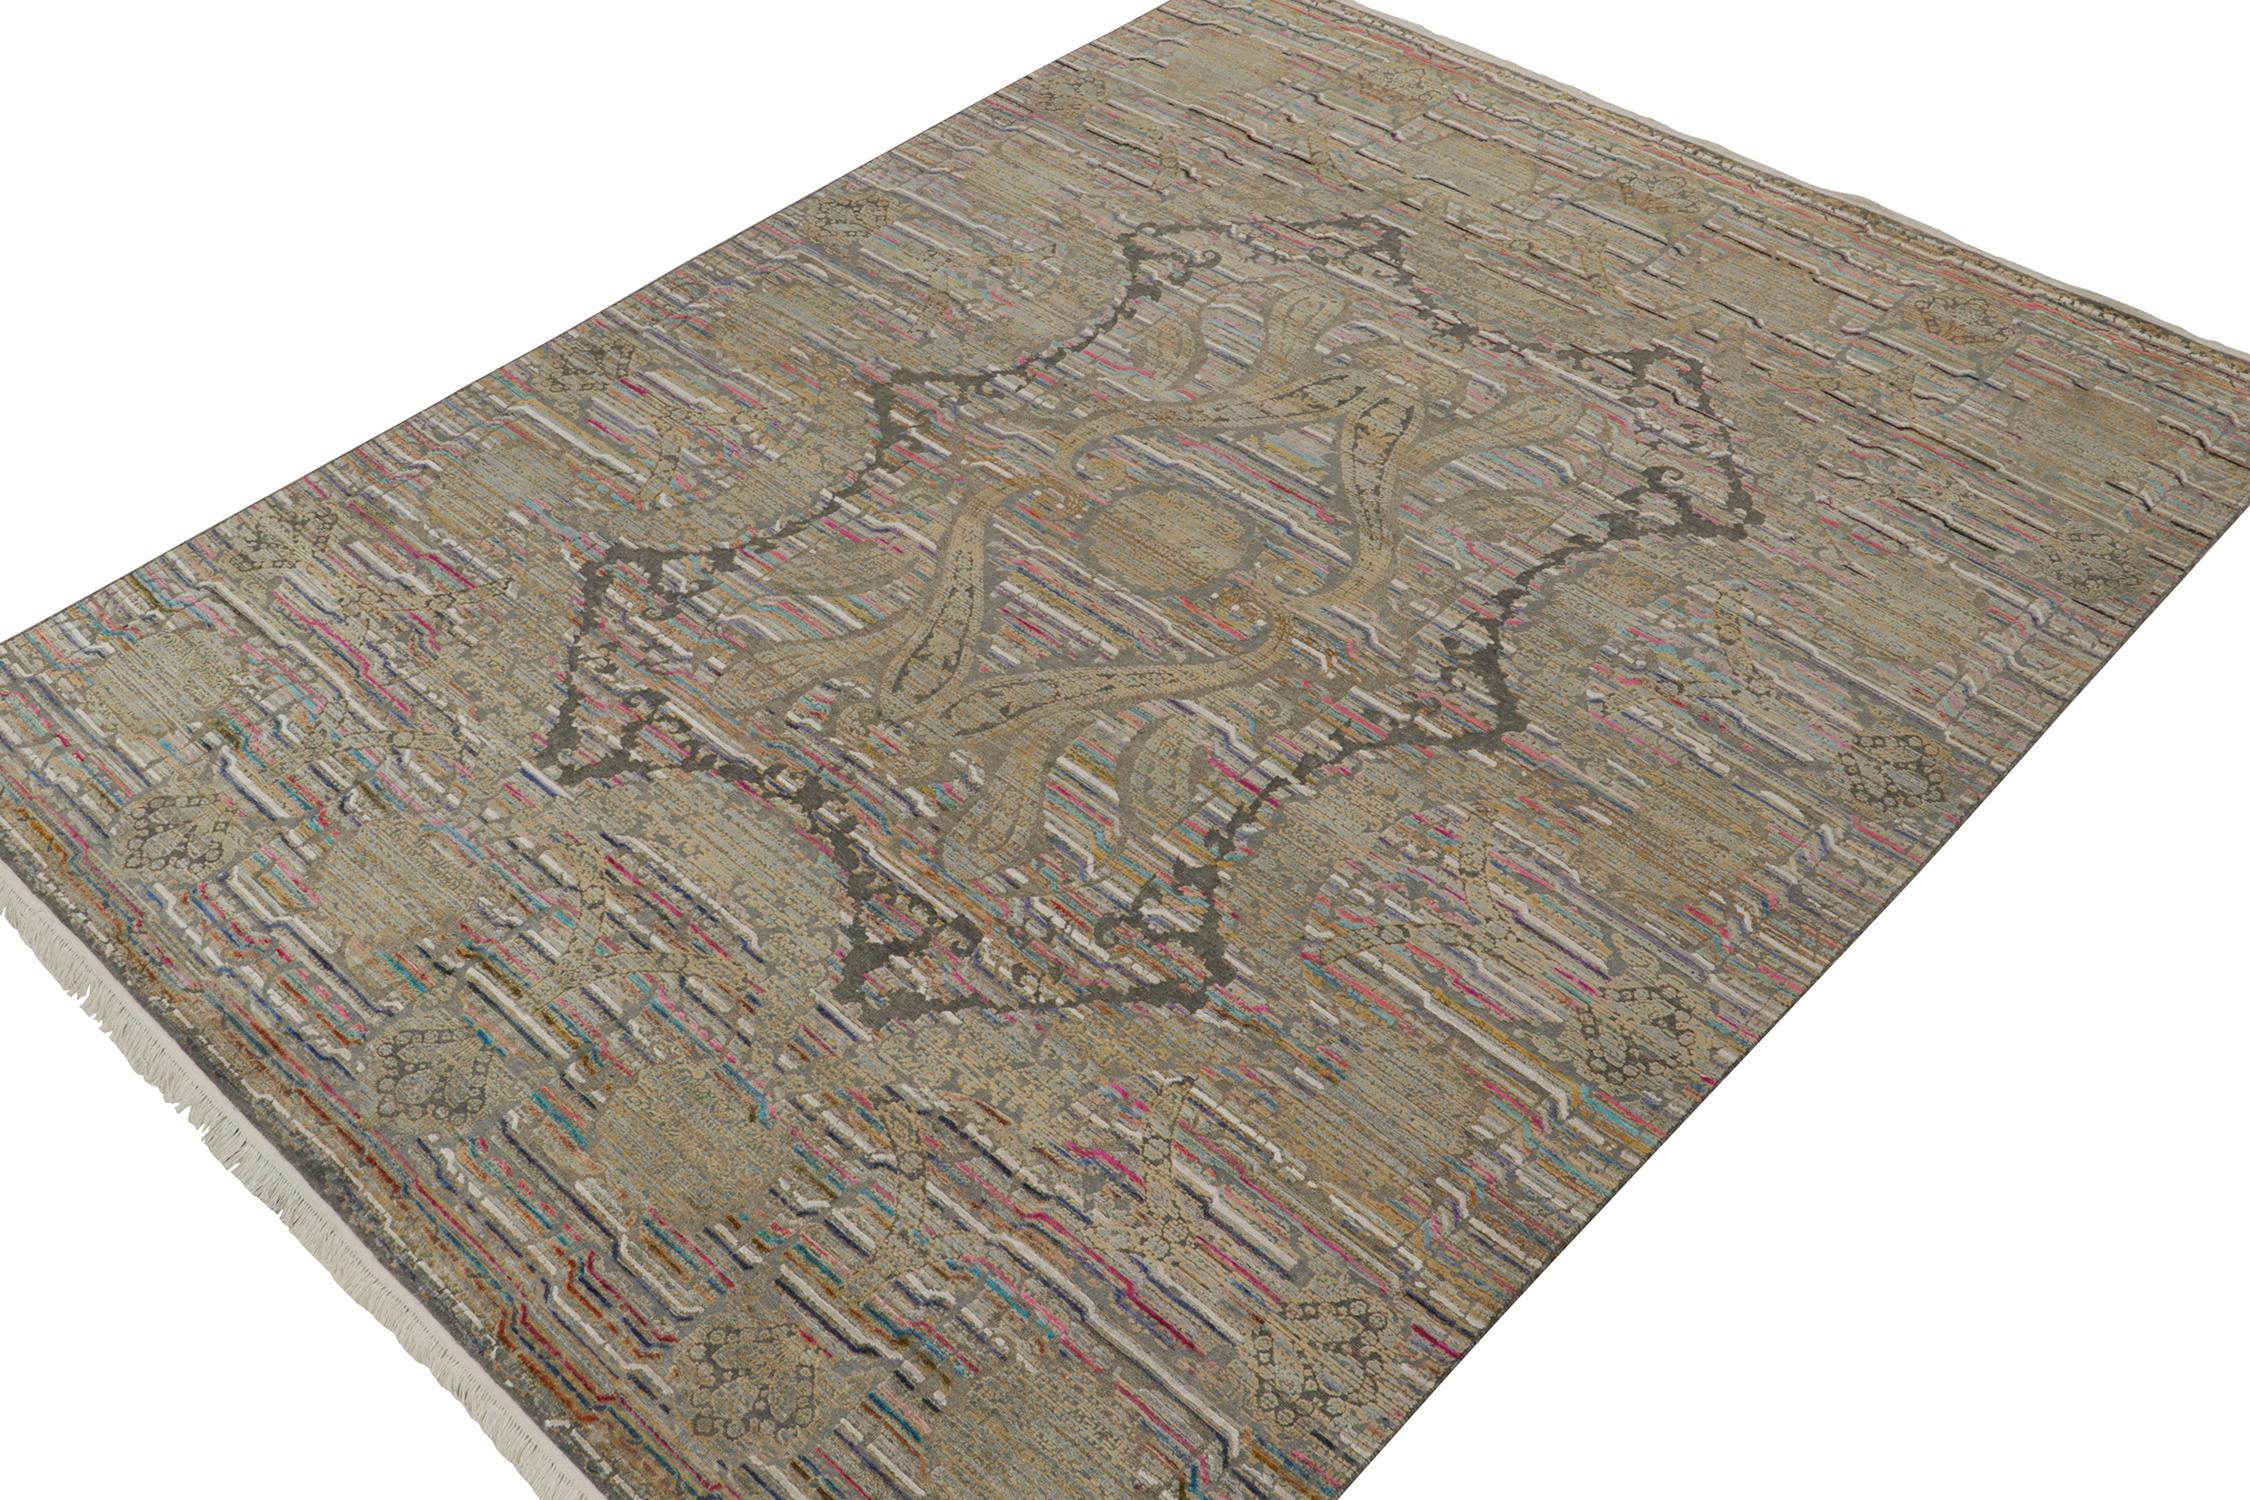 This antique 9x13 French Deco rug is the next addition to Rug & Kilim’s rare curation of classic rugs. Hand-knotted in wool circa 1920-1930.
Further on the design: 
This extremely rare piece exemplifies the Art Deco art style of the 1920s, and